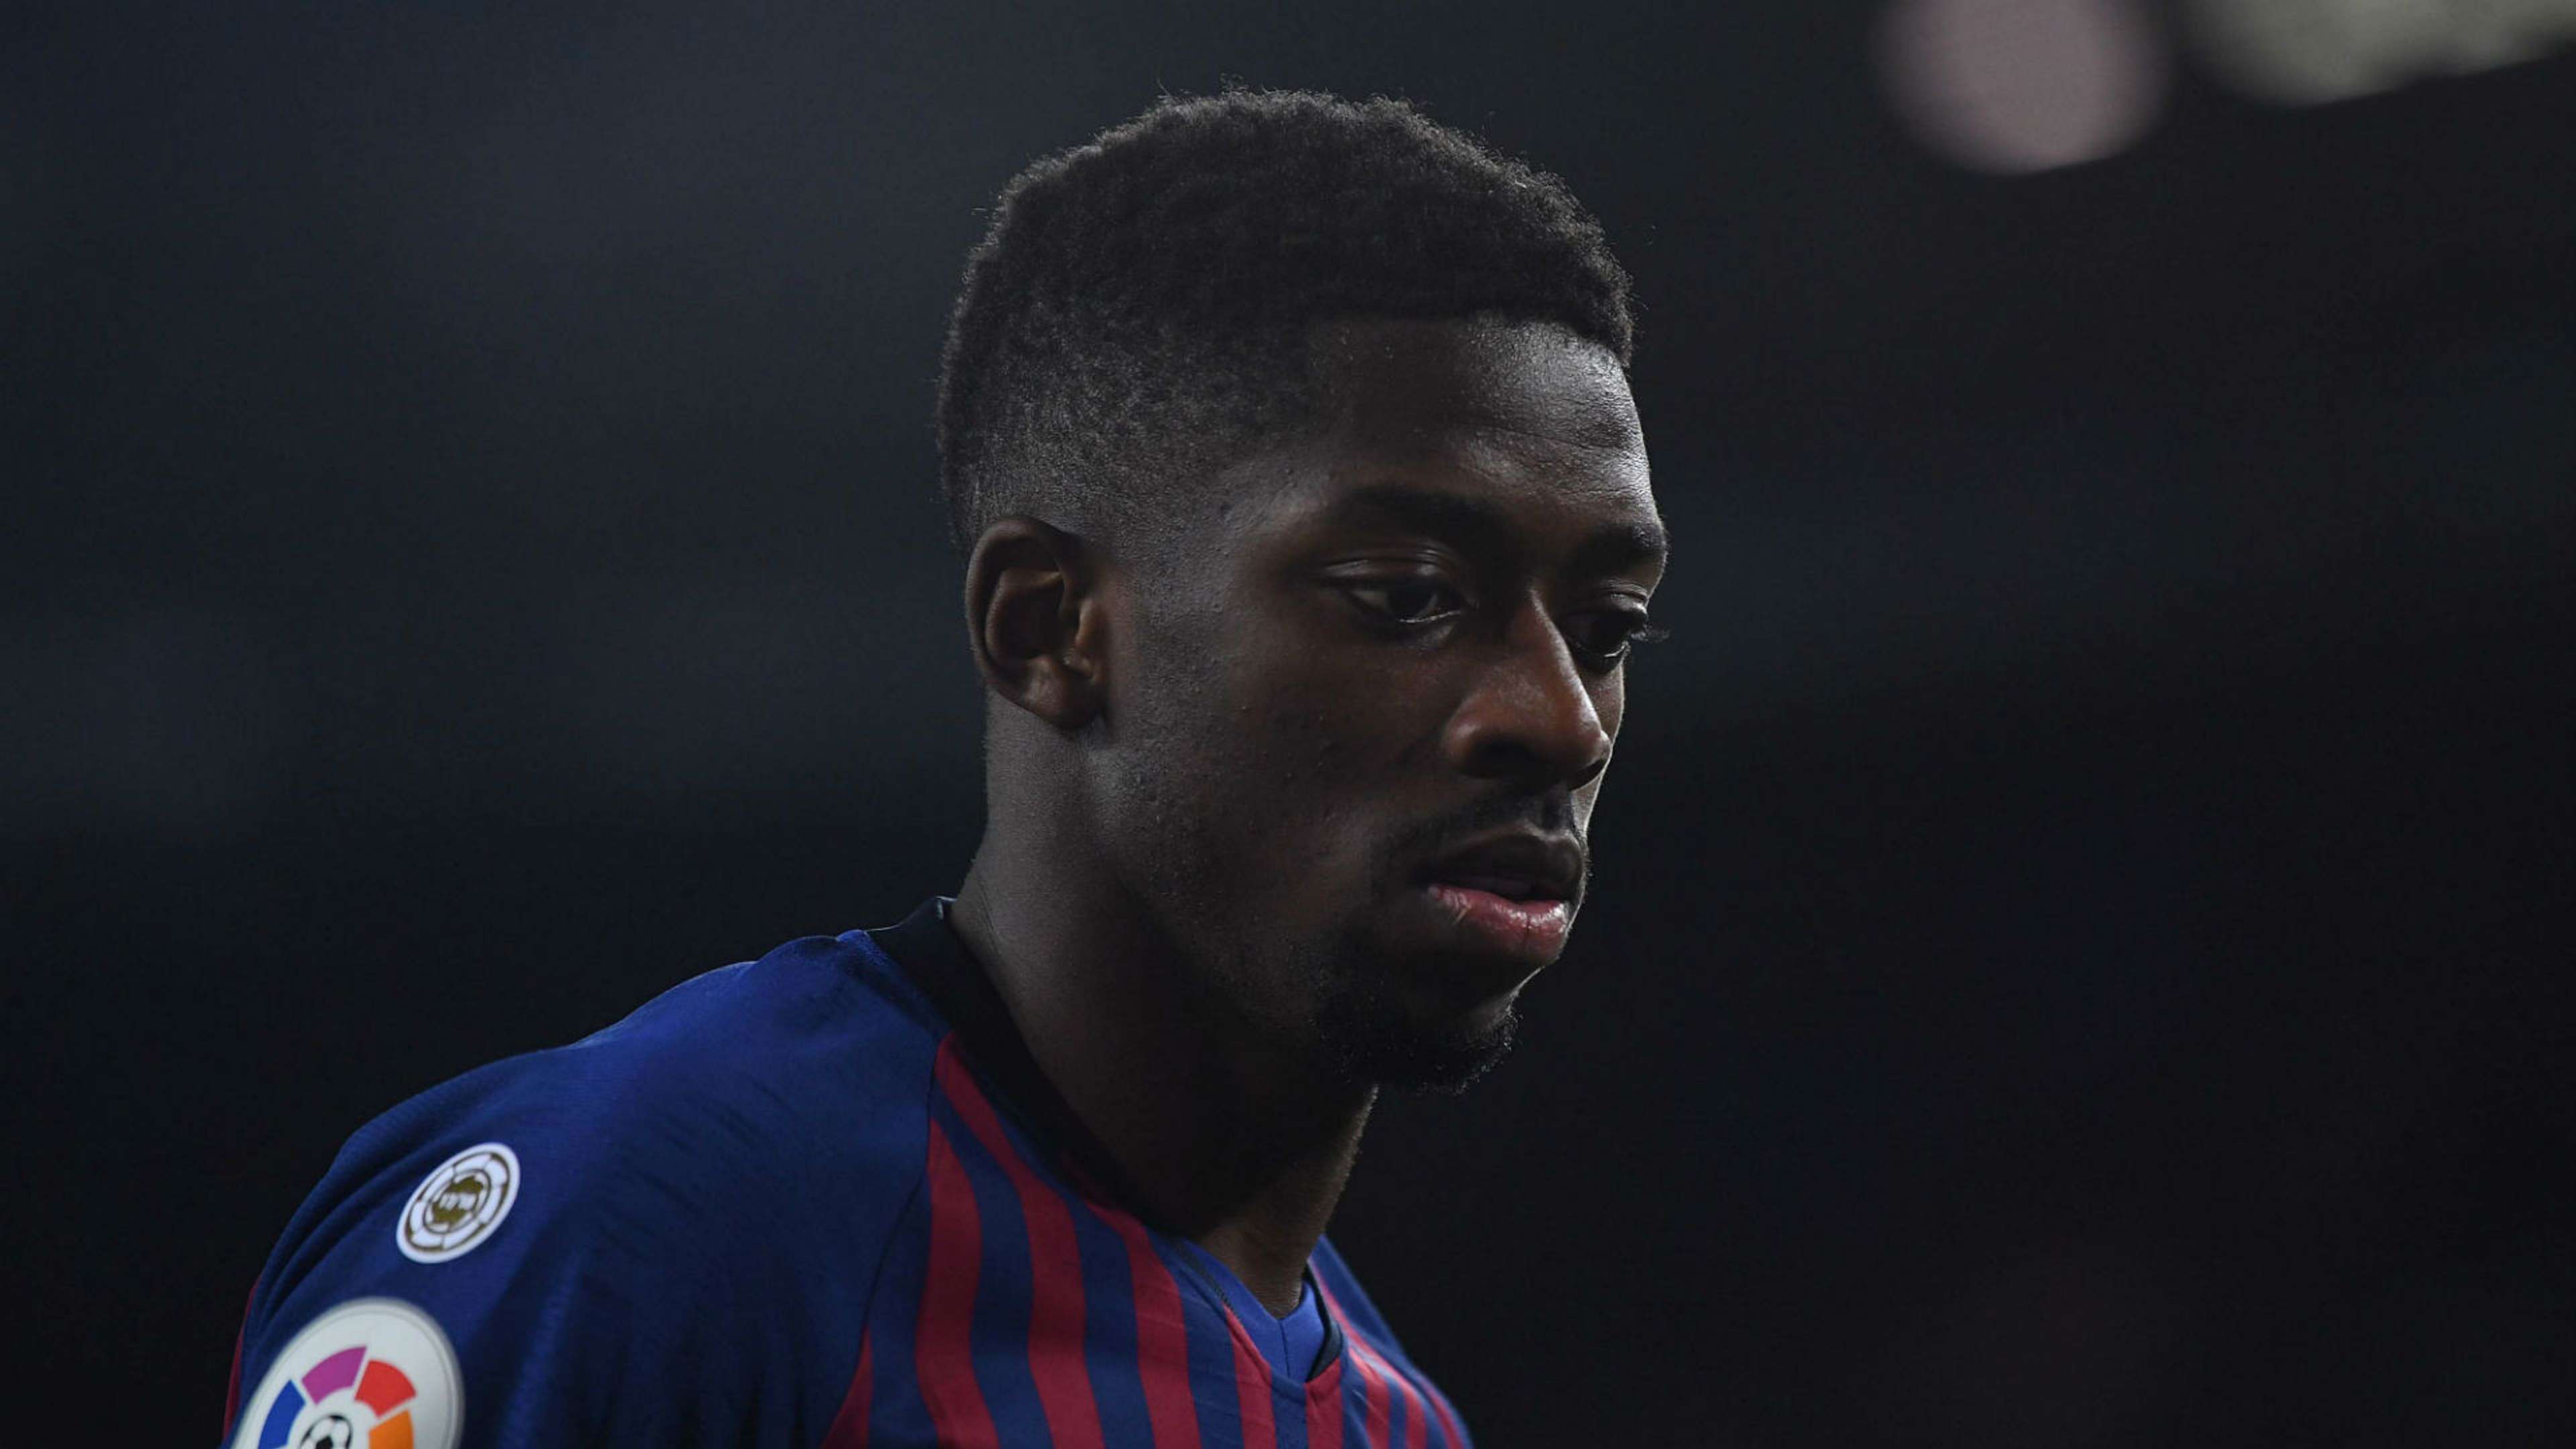 dembele-cropped